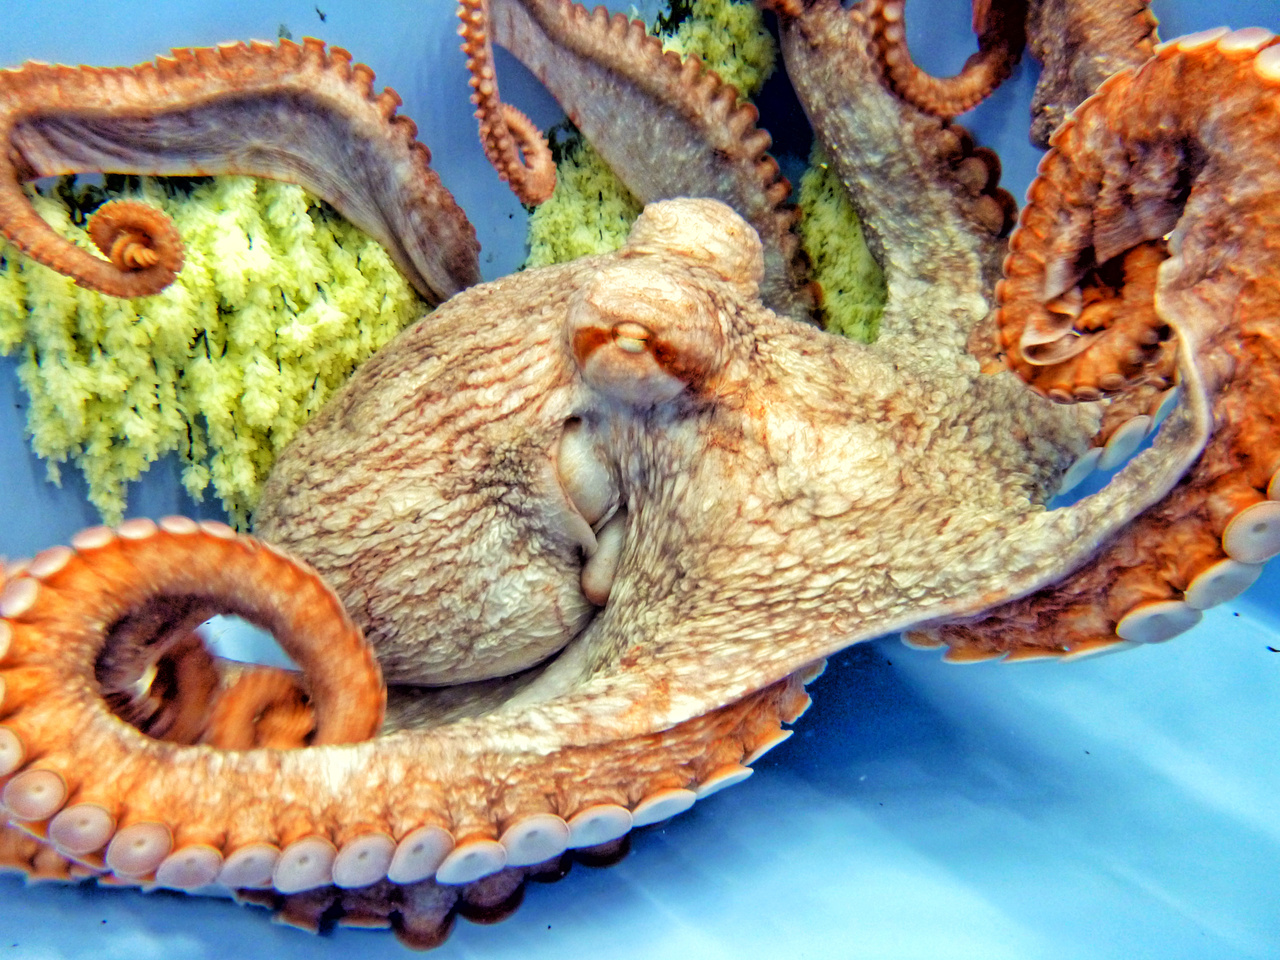 largest octopus ever caught